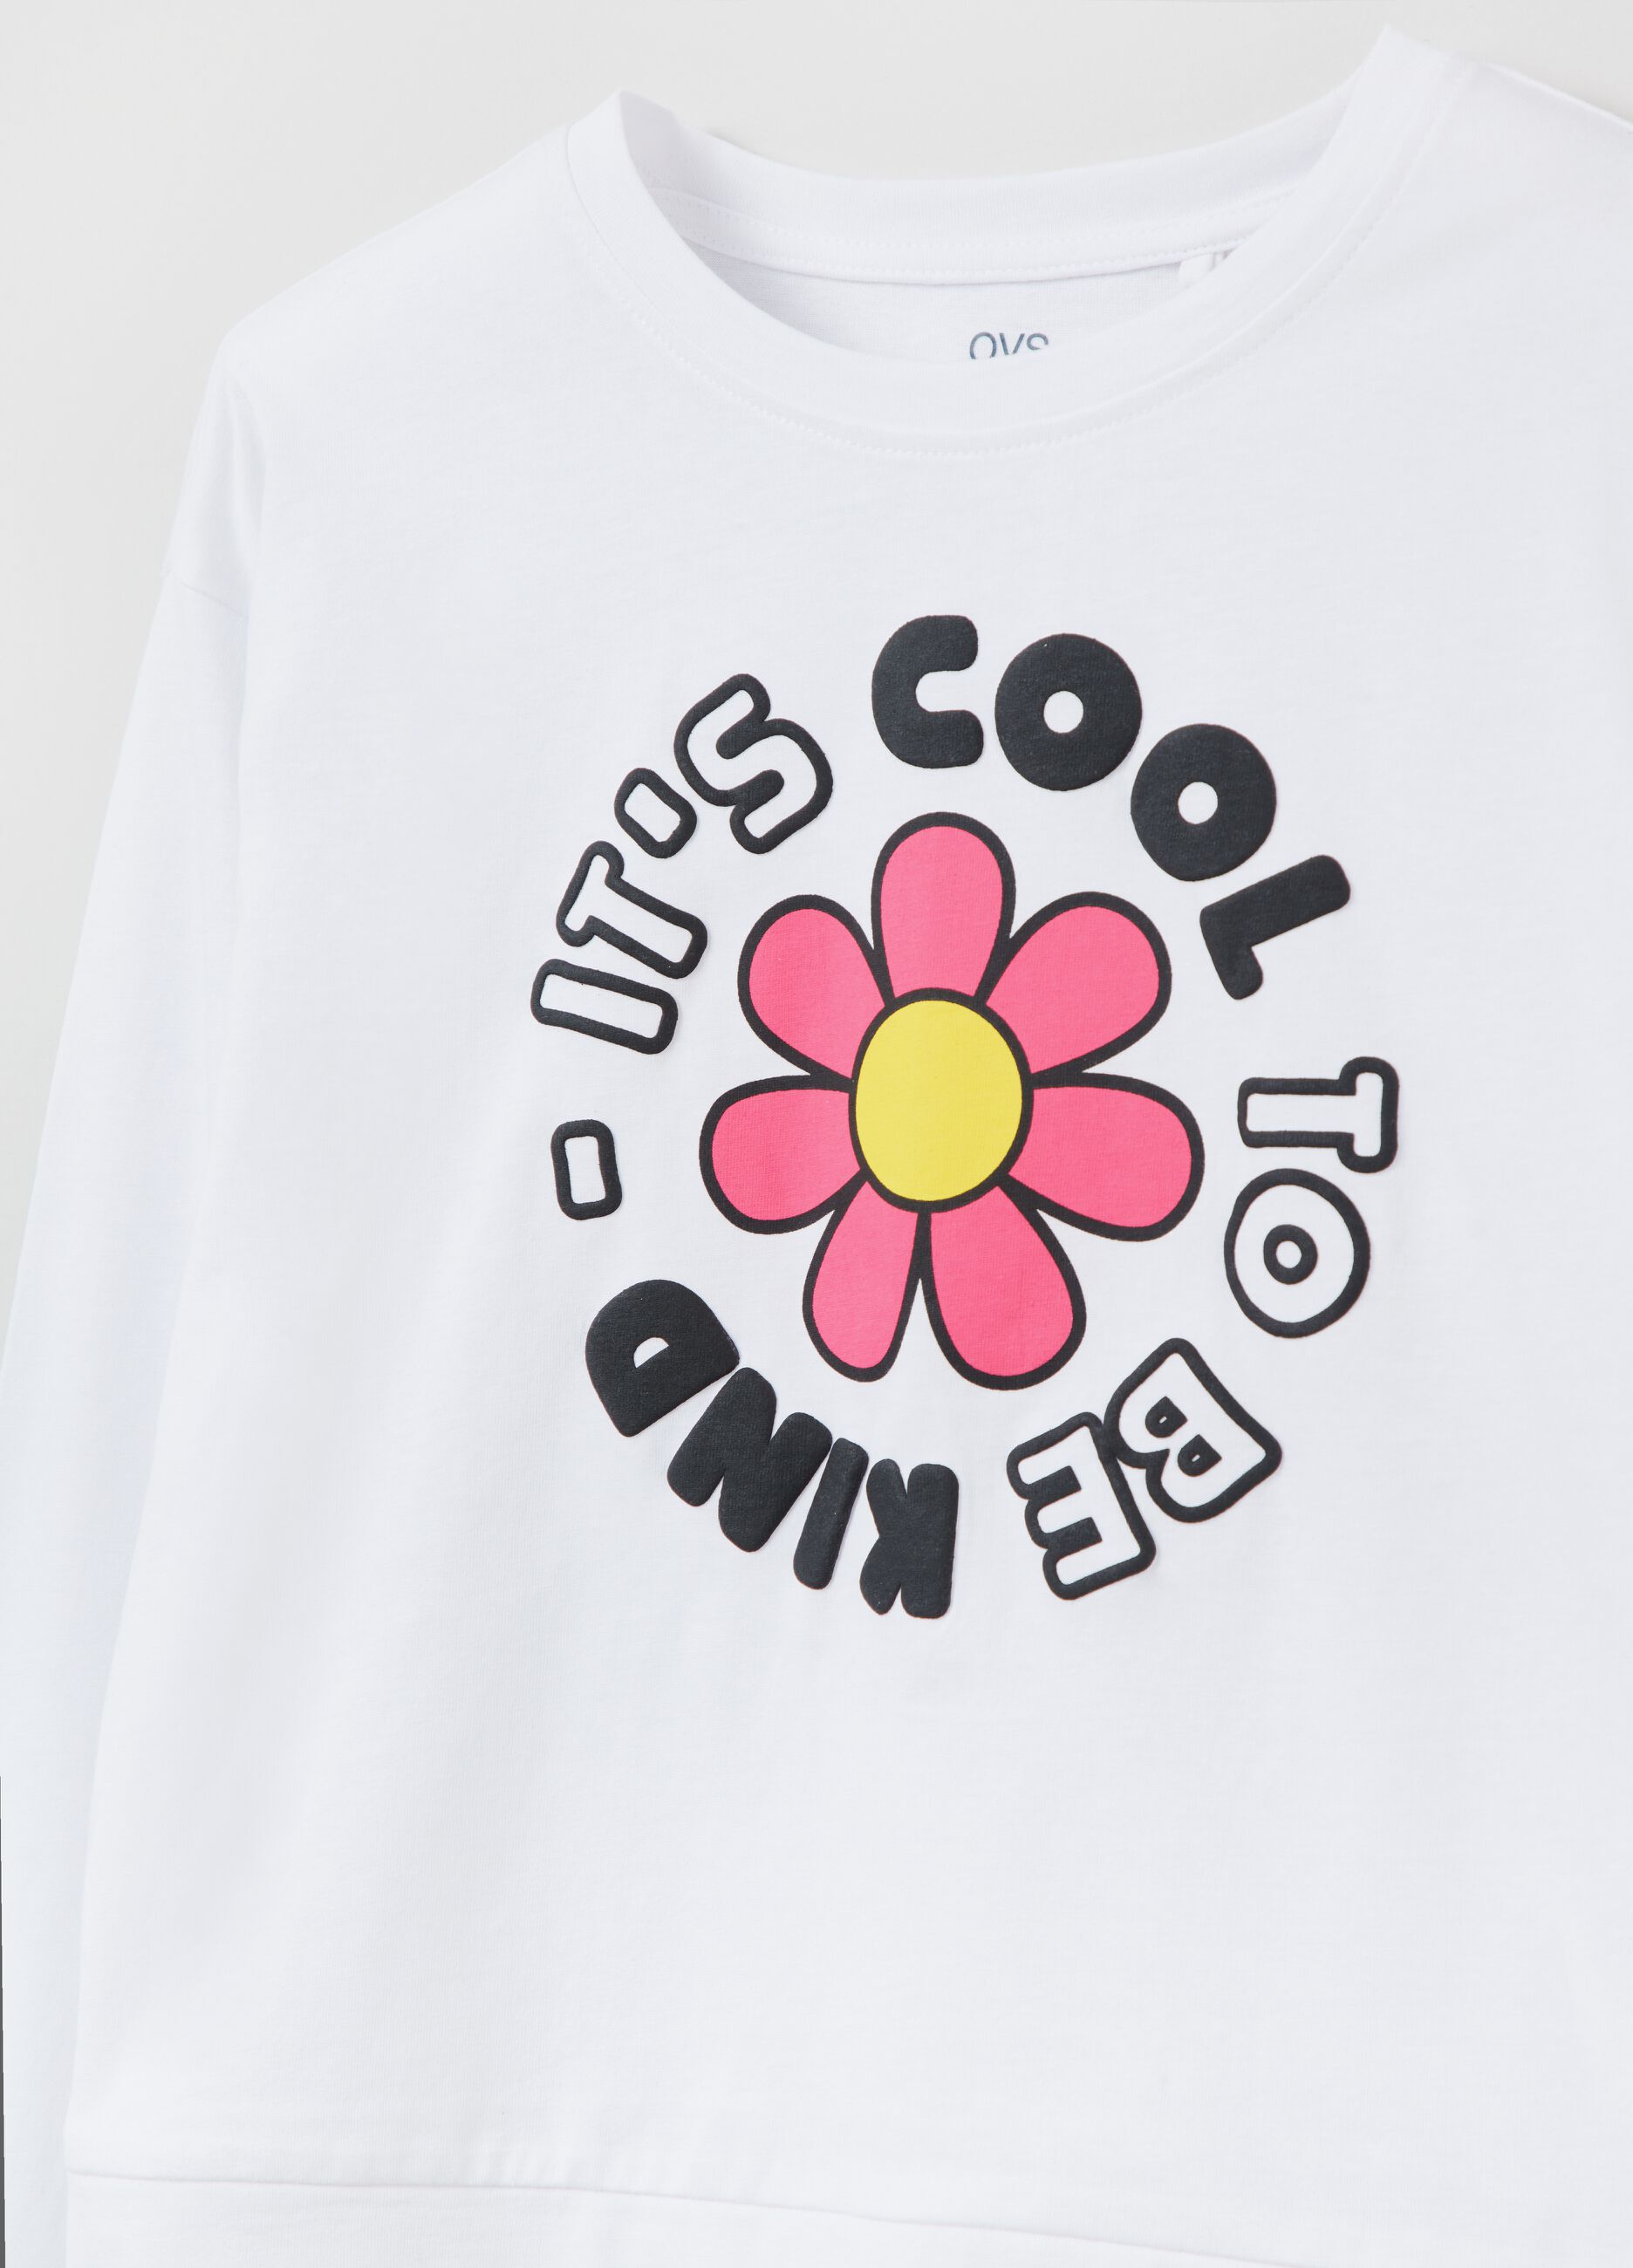 T-shirt with long sleeves and printed lettering.